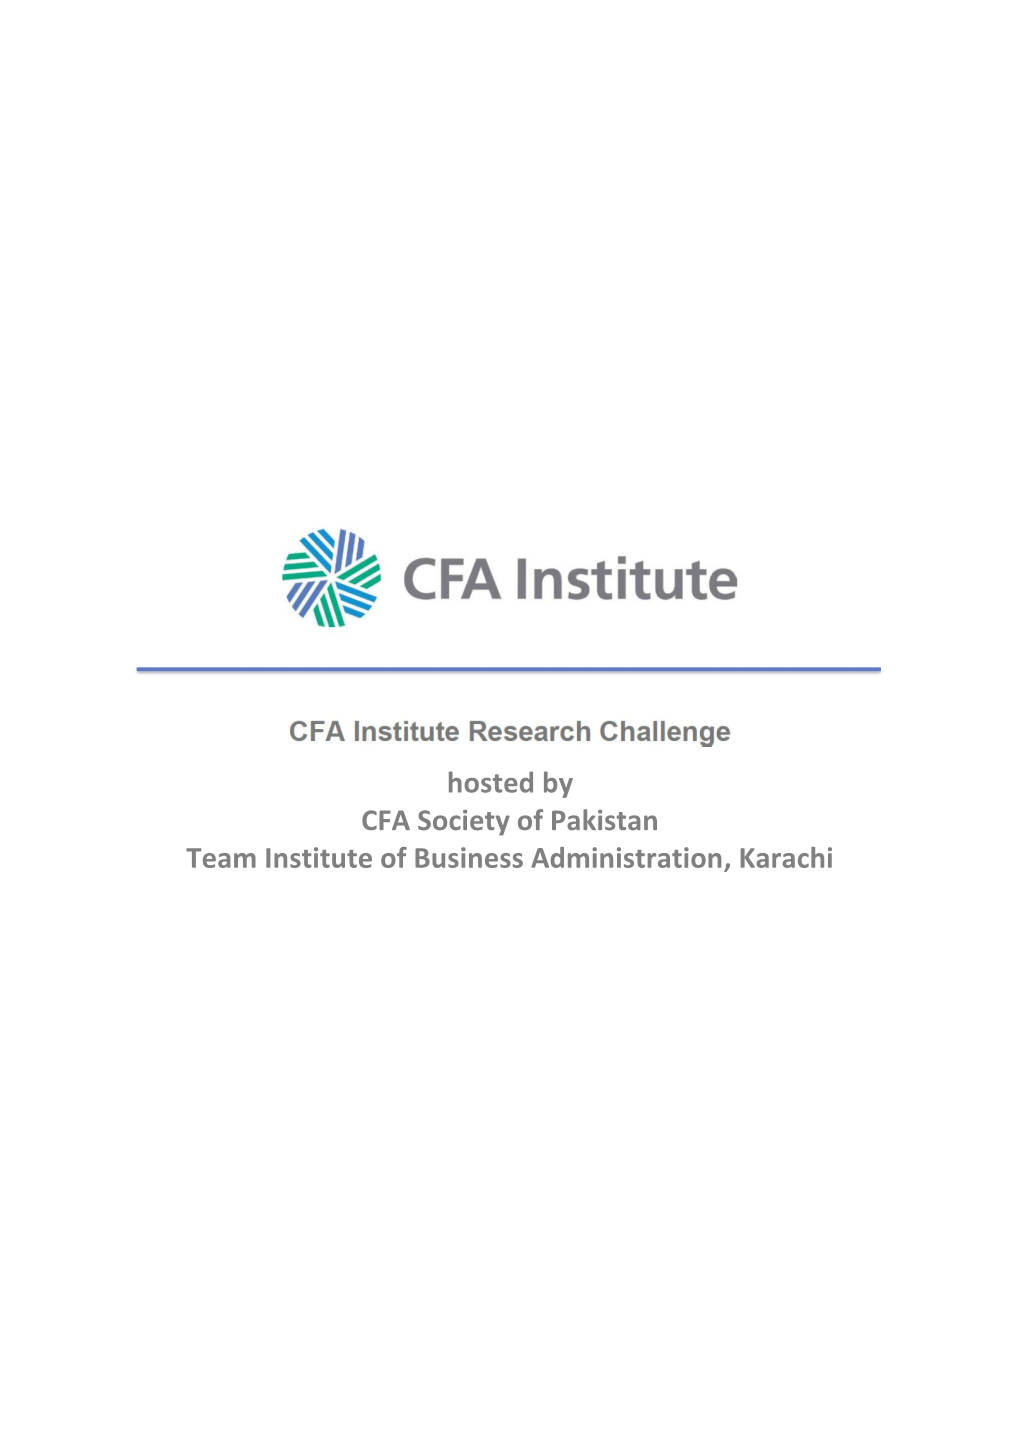 Hosted by CFA Society of Pakistan Team Institute of Business